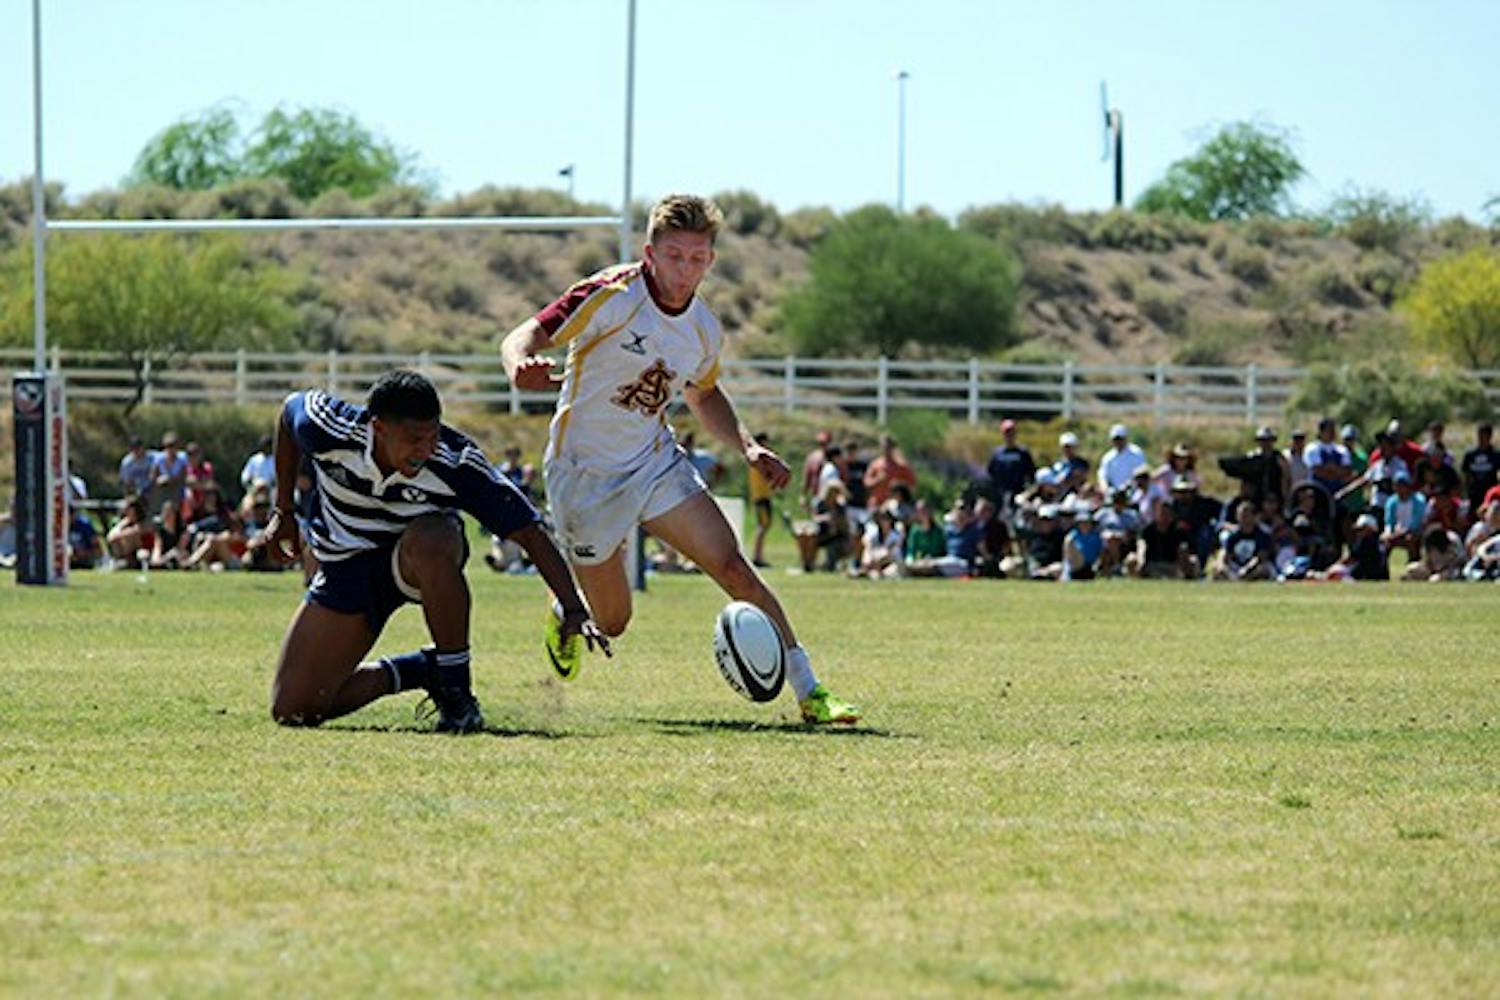 Senior center Adam Sandstrom punts the ball away from a BYU player in the Rugby Bowl in Scottsdale on April 12. ASU lost against BYU 52-26. (Photo by Alexis Macklin)